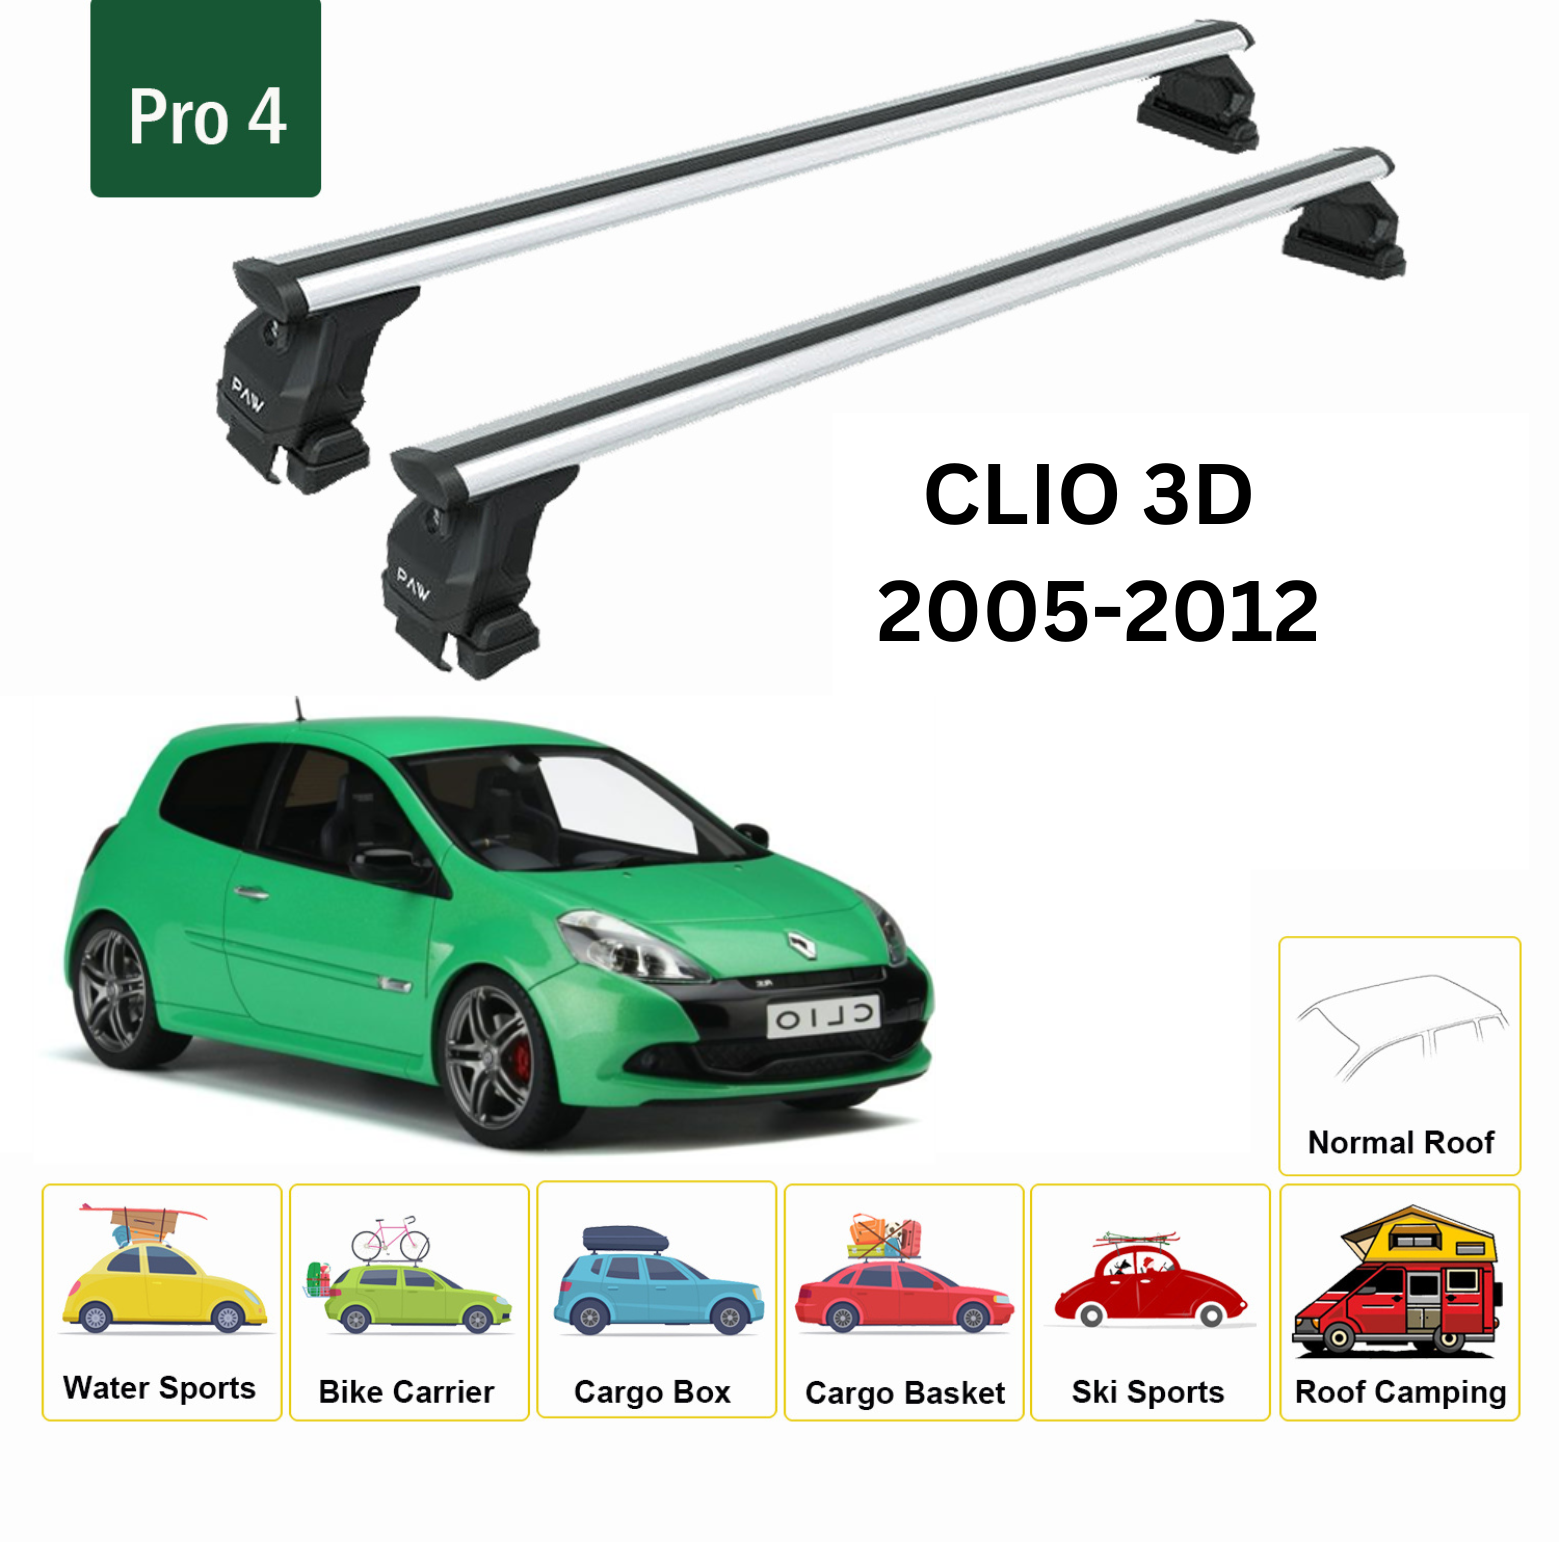 For Renault Clio 3D 2005-2012 Roof Rack System, Aluminium Cross Bar, Metal Bracket, Normal Roof, Silver